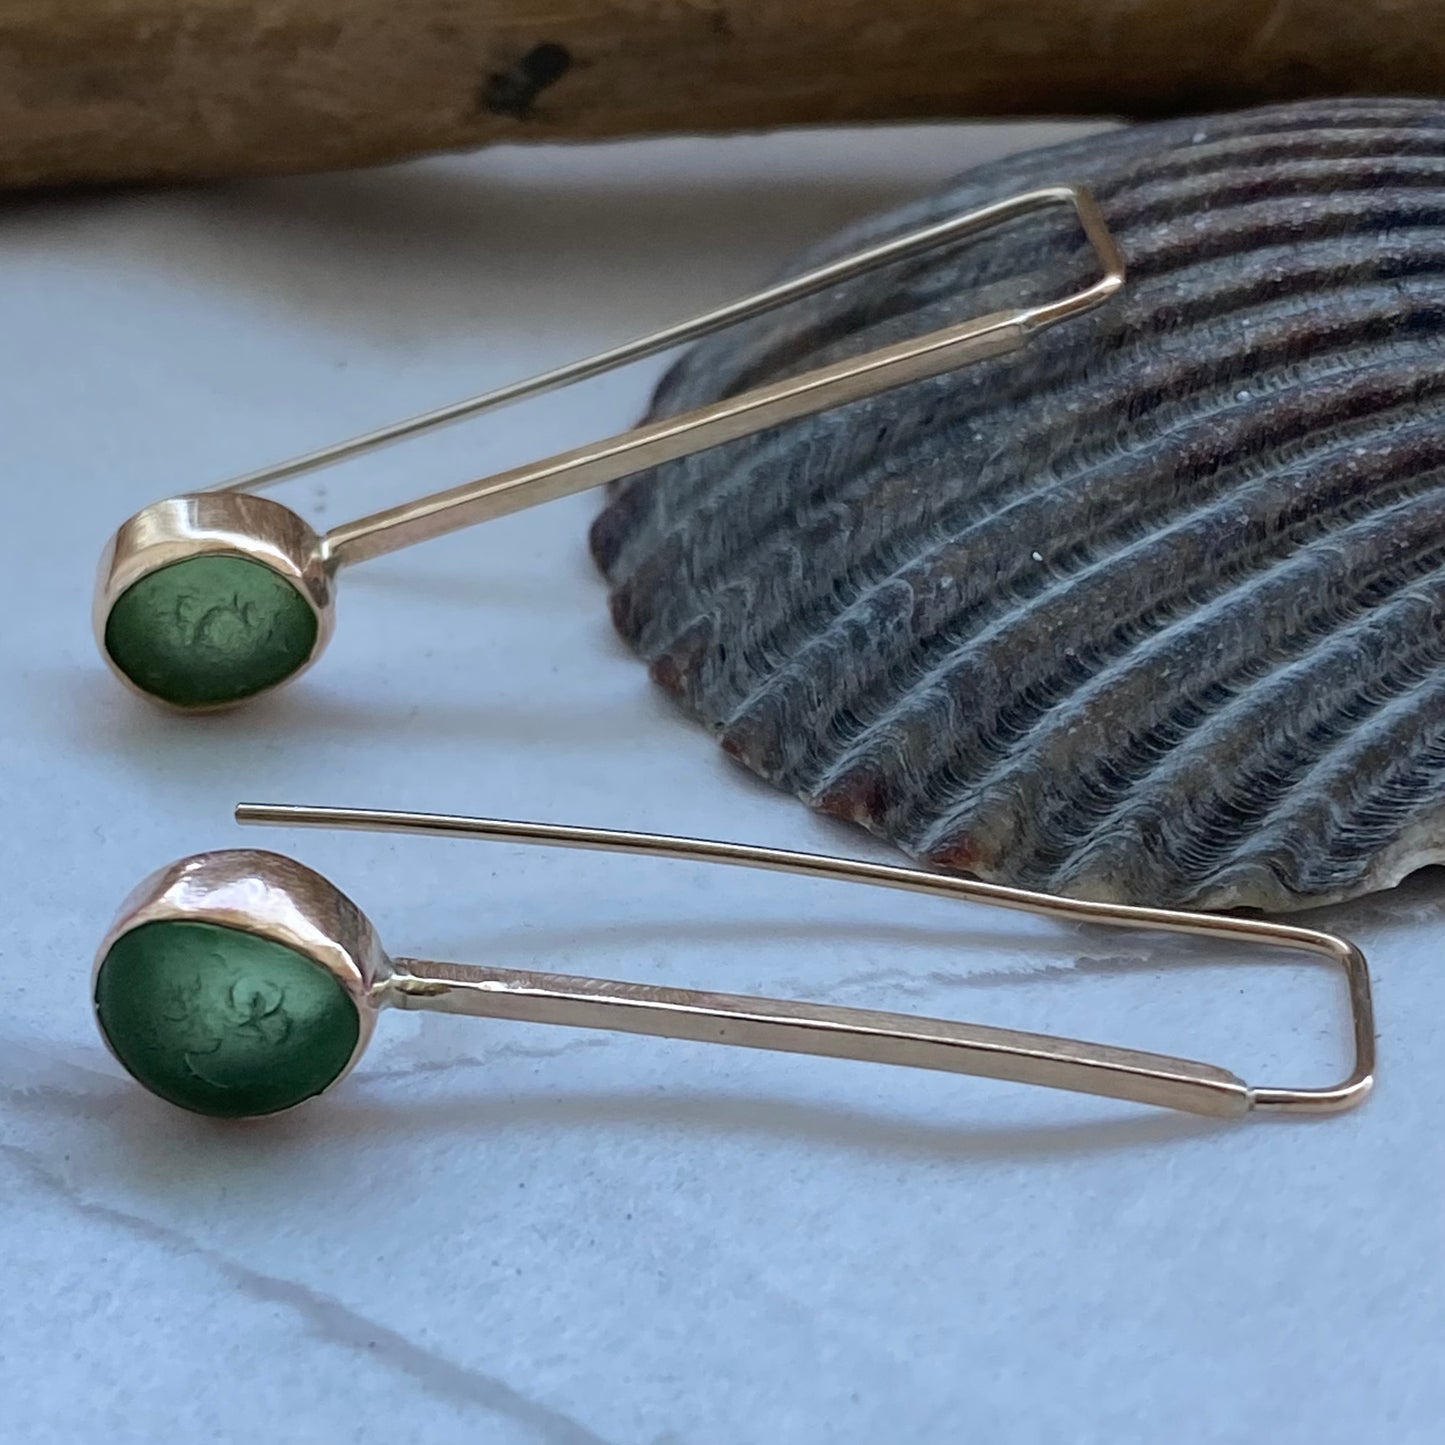 The Art Deco Threader in Gold | Sea Glass Earrings